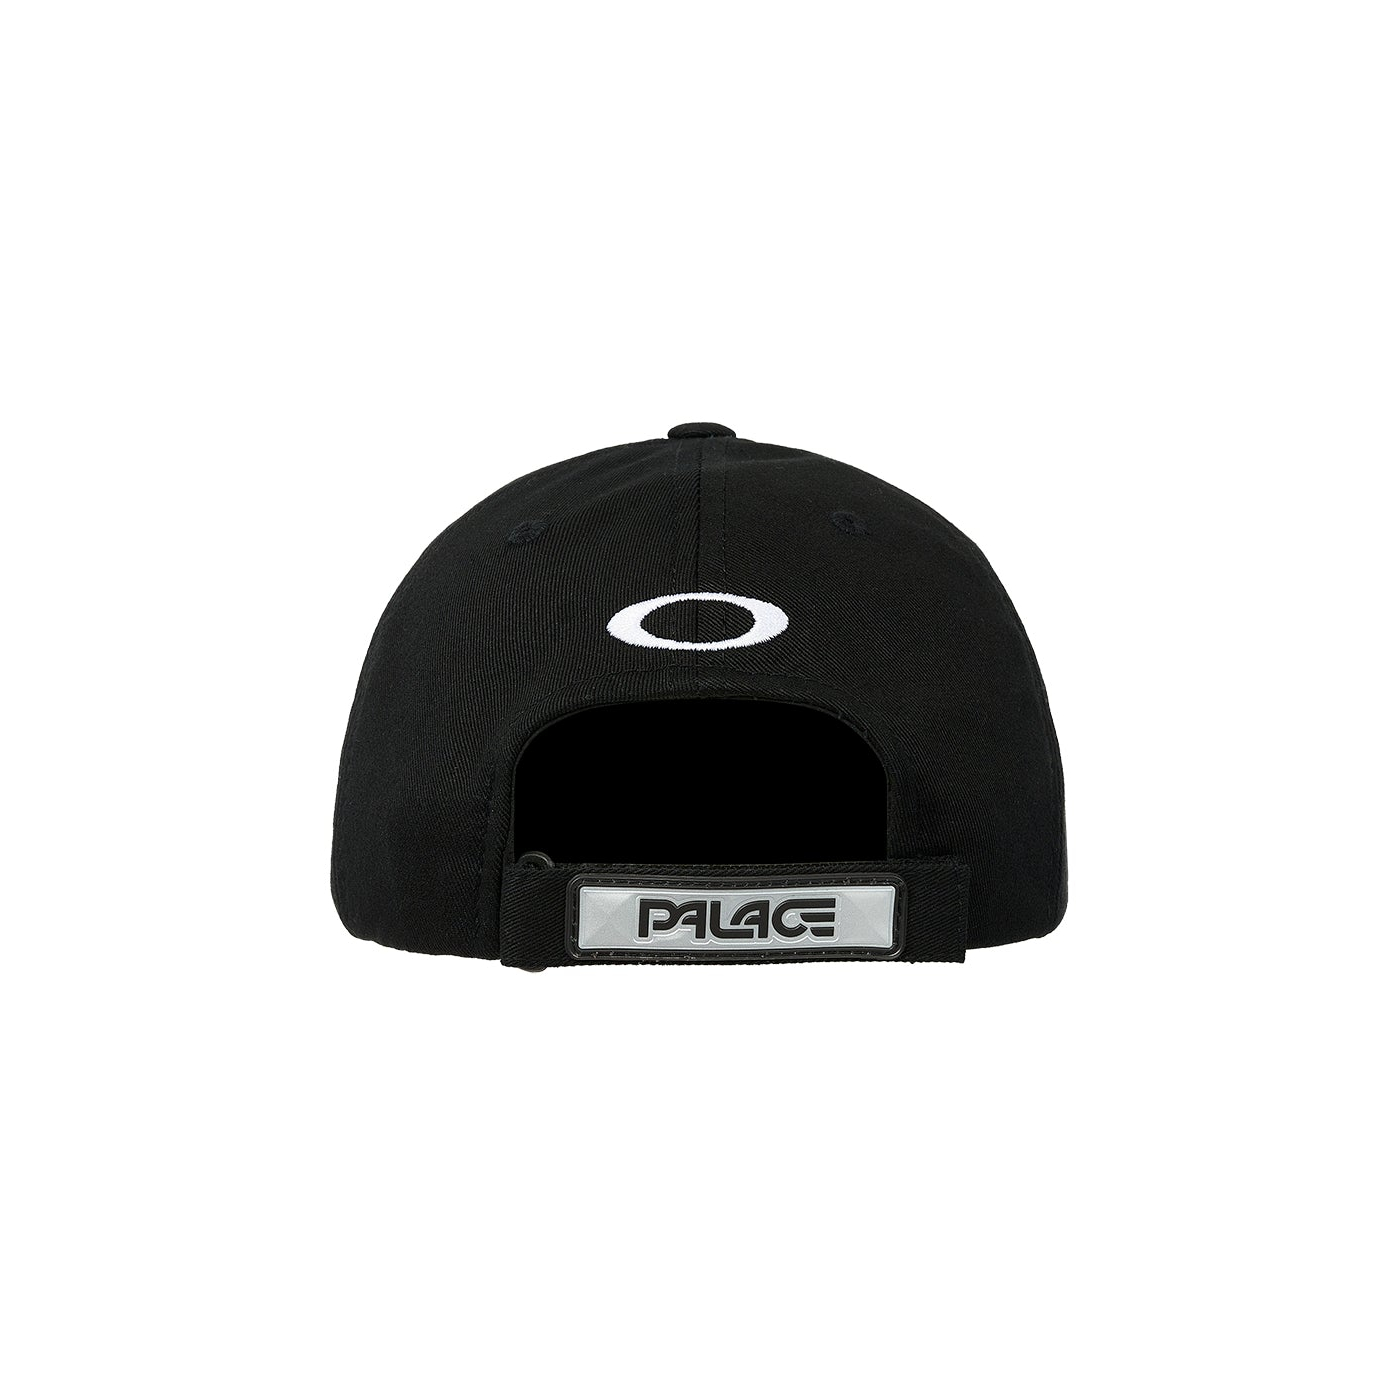 Thumbnail PALACE OAKLEY 6-PANEL BLACK / SILVER one color